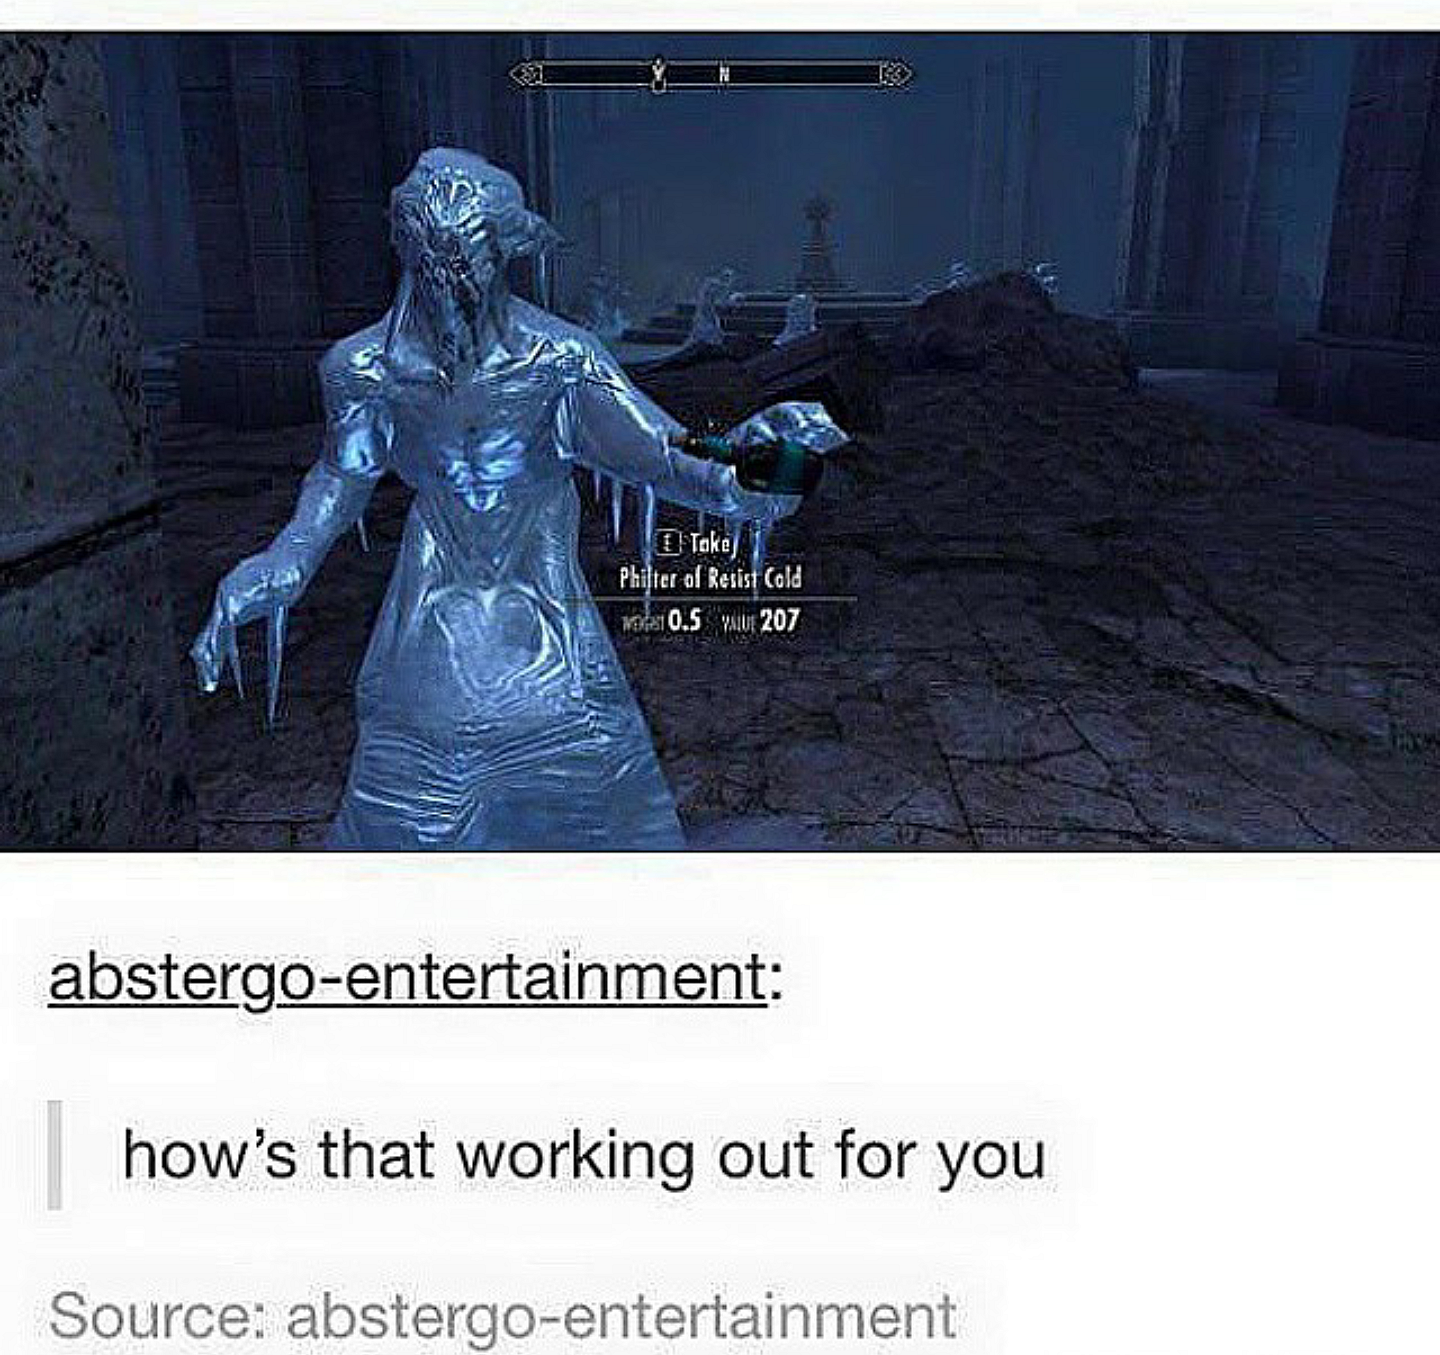 falmer skyrim meme - Phelter Voor 0.5 Resist Cold 207 abstergoentertainment how's that working out for you Source abstergoentertainment